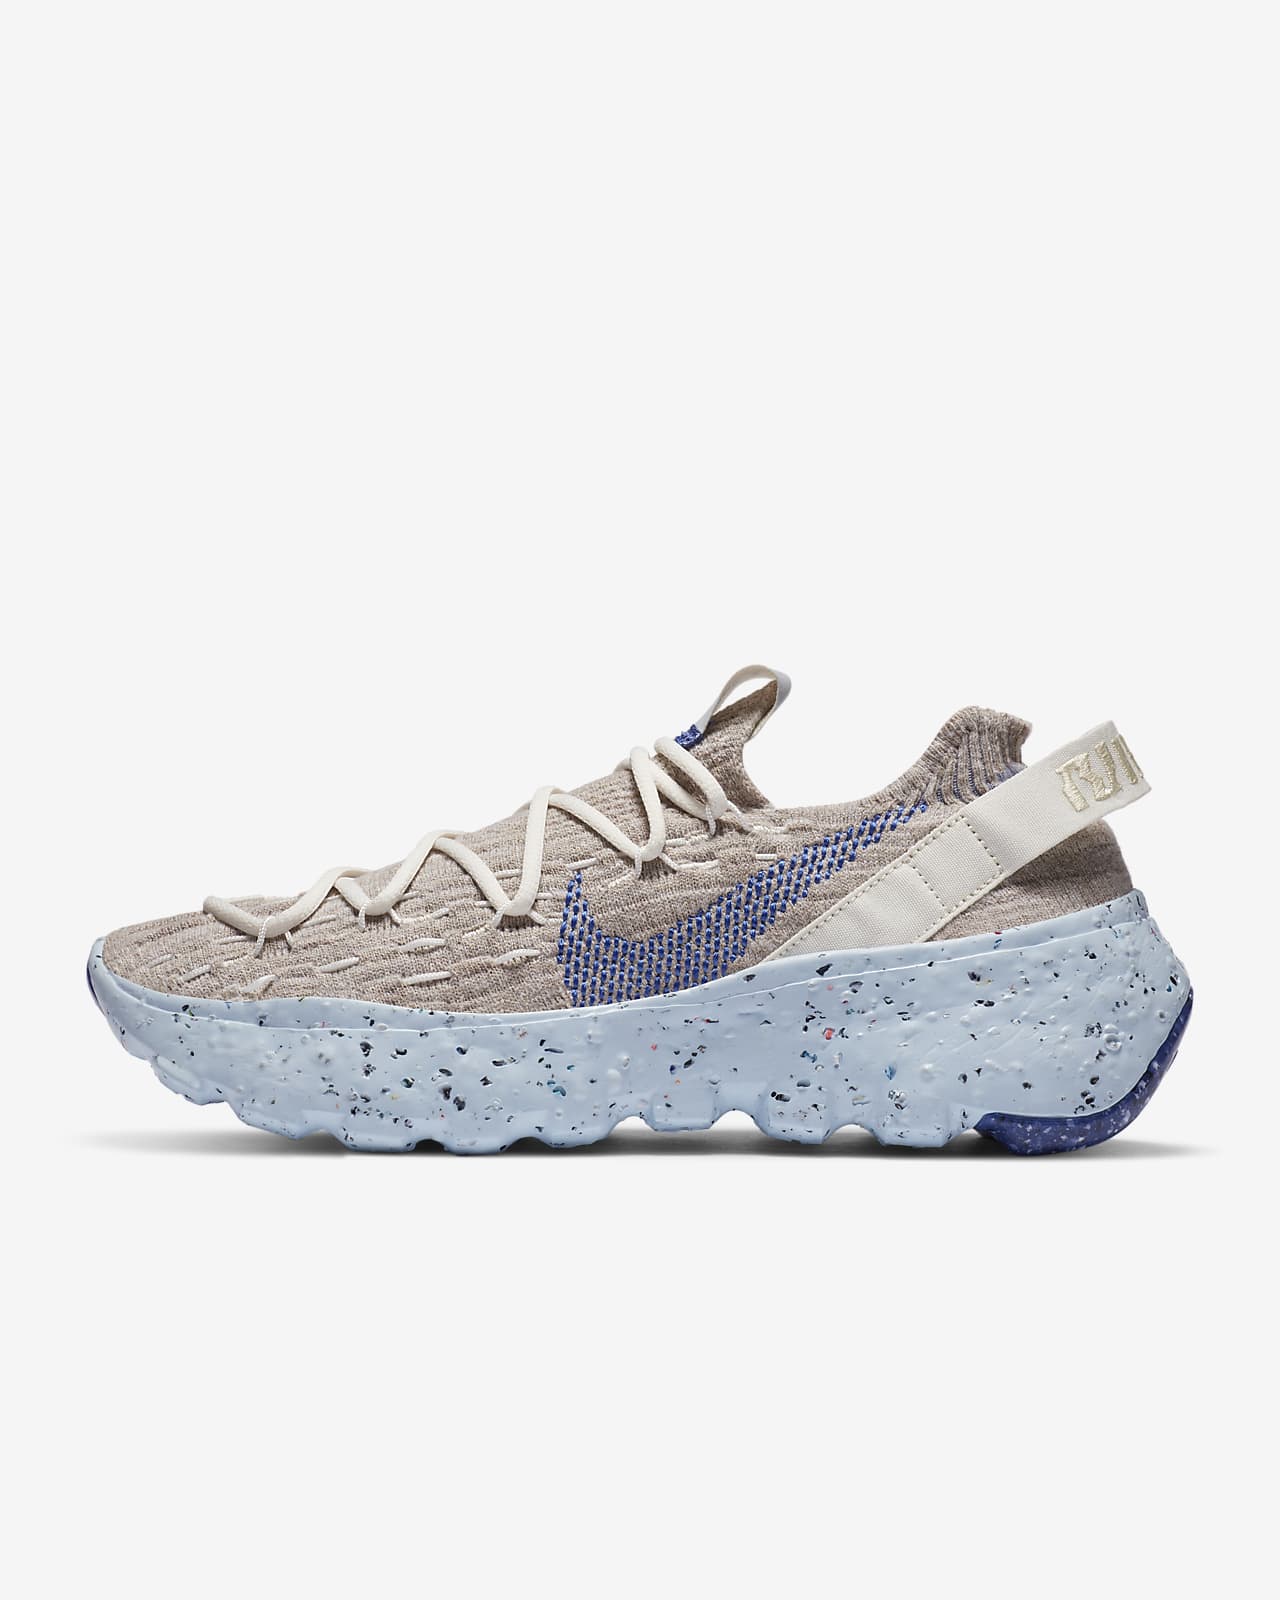 nike space hippie snkrs